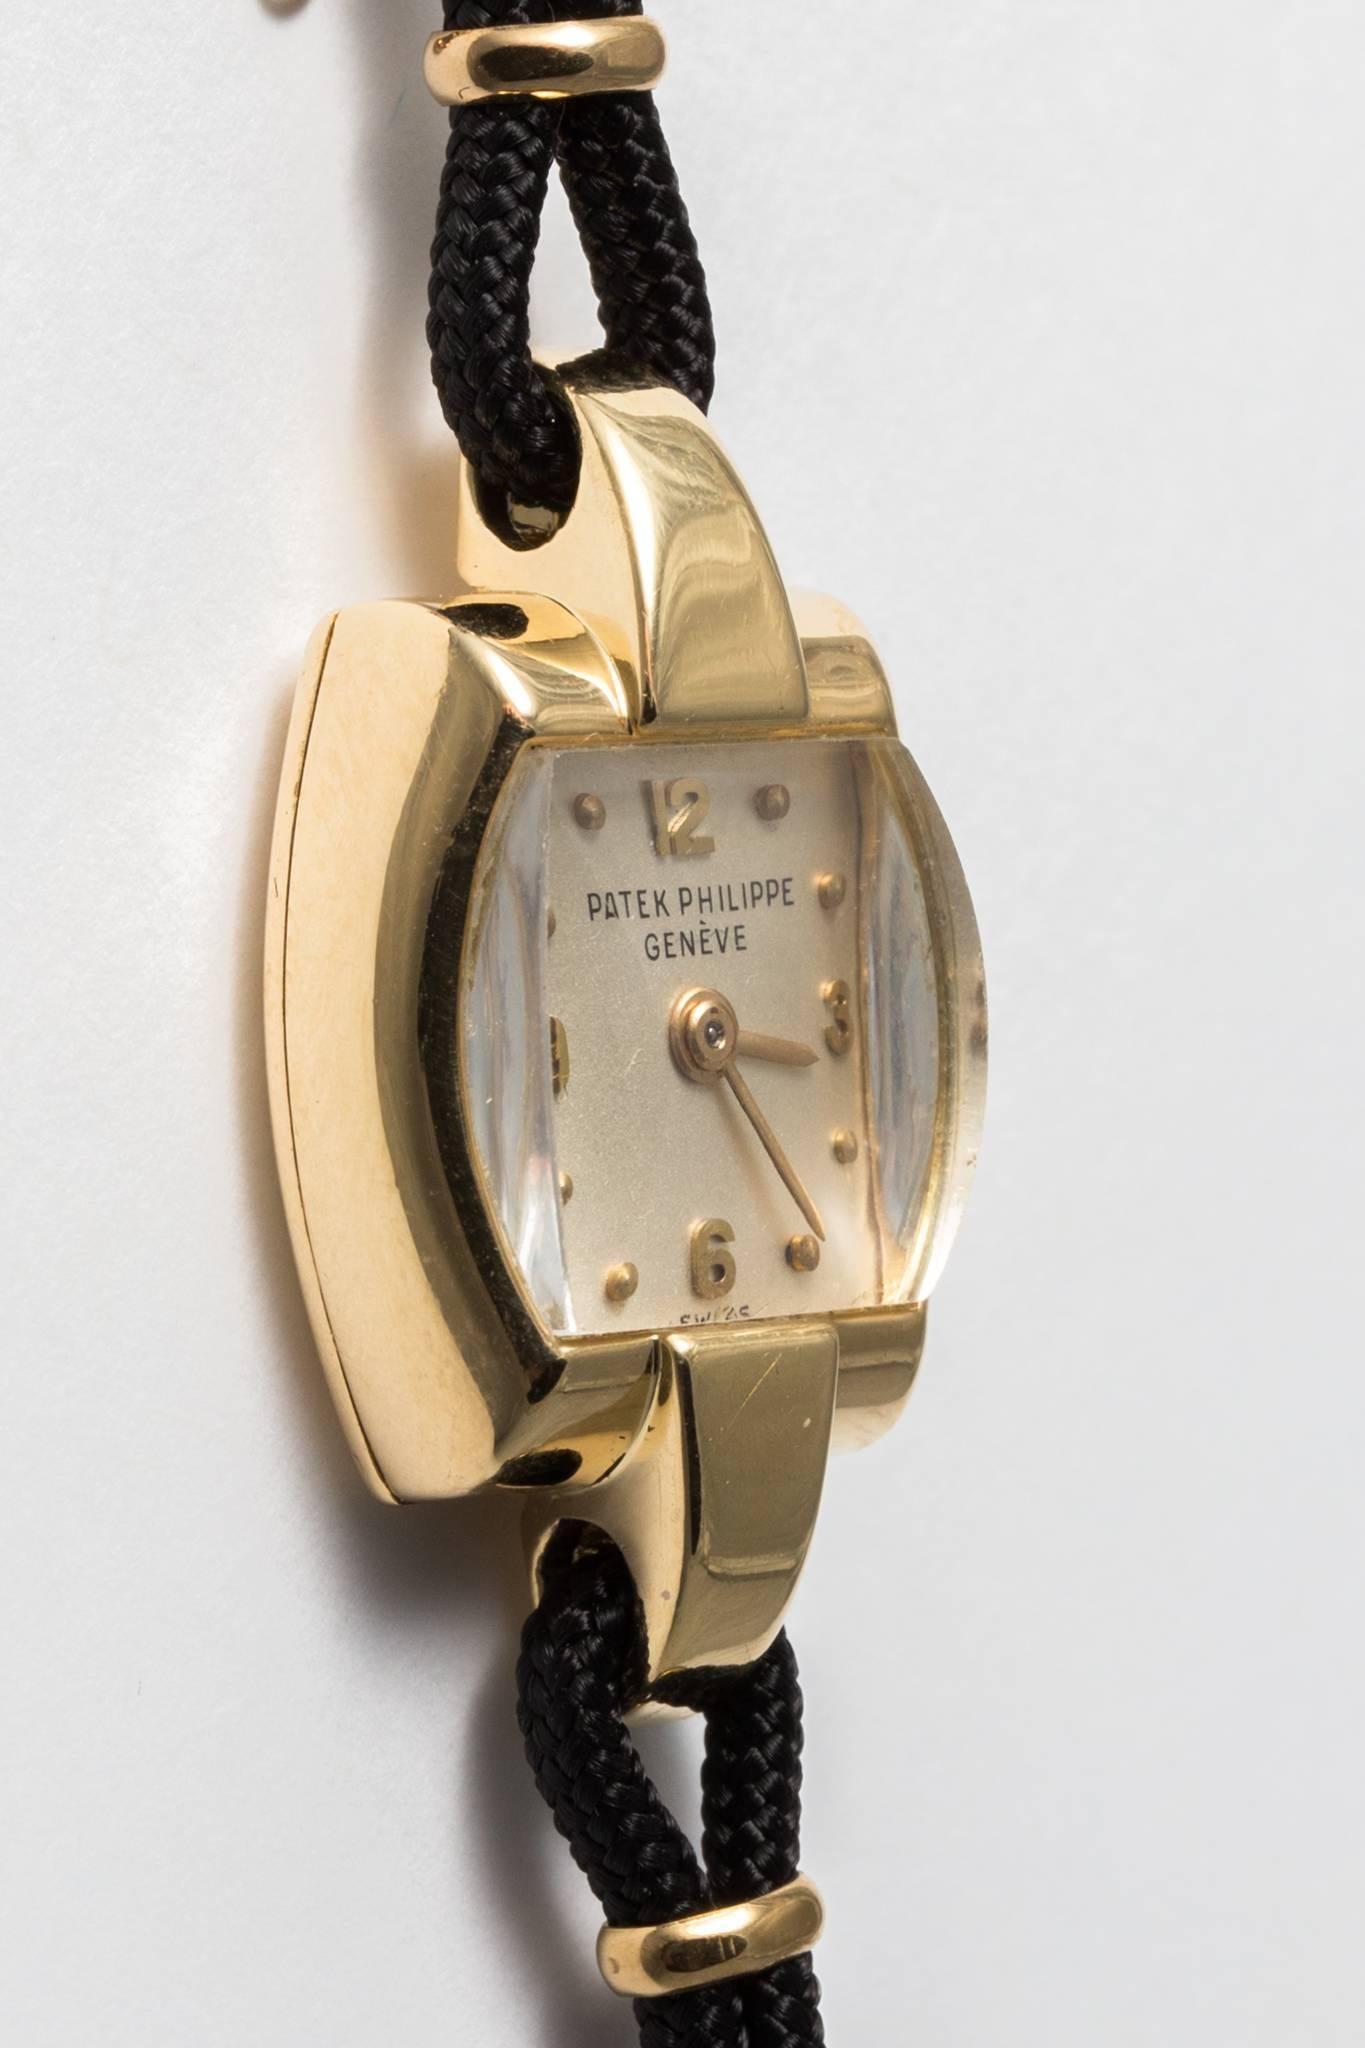 Beacon Hill Jewelers Presents:

A vintage mid century ladies Patek Philippe wrist watch in 18 karat yellow gold.  Mated to a black silk cord strap, this classic vintage ladies wrist watch is in truly immaculate condition.  Having just been fully